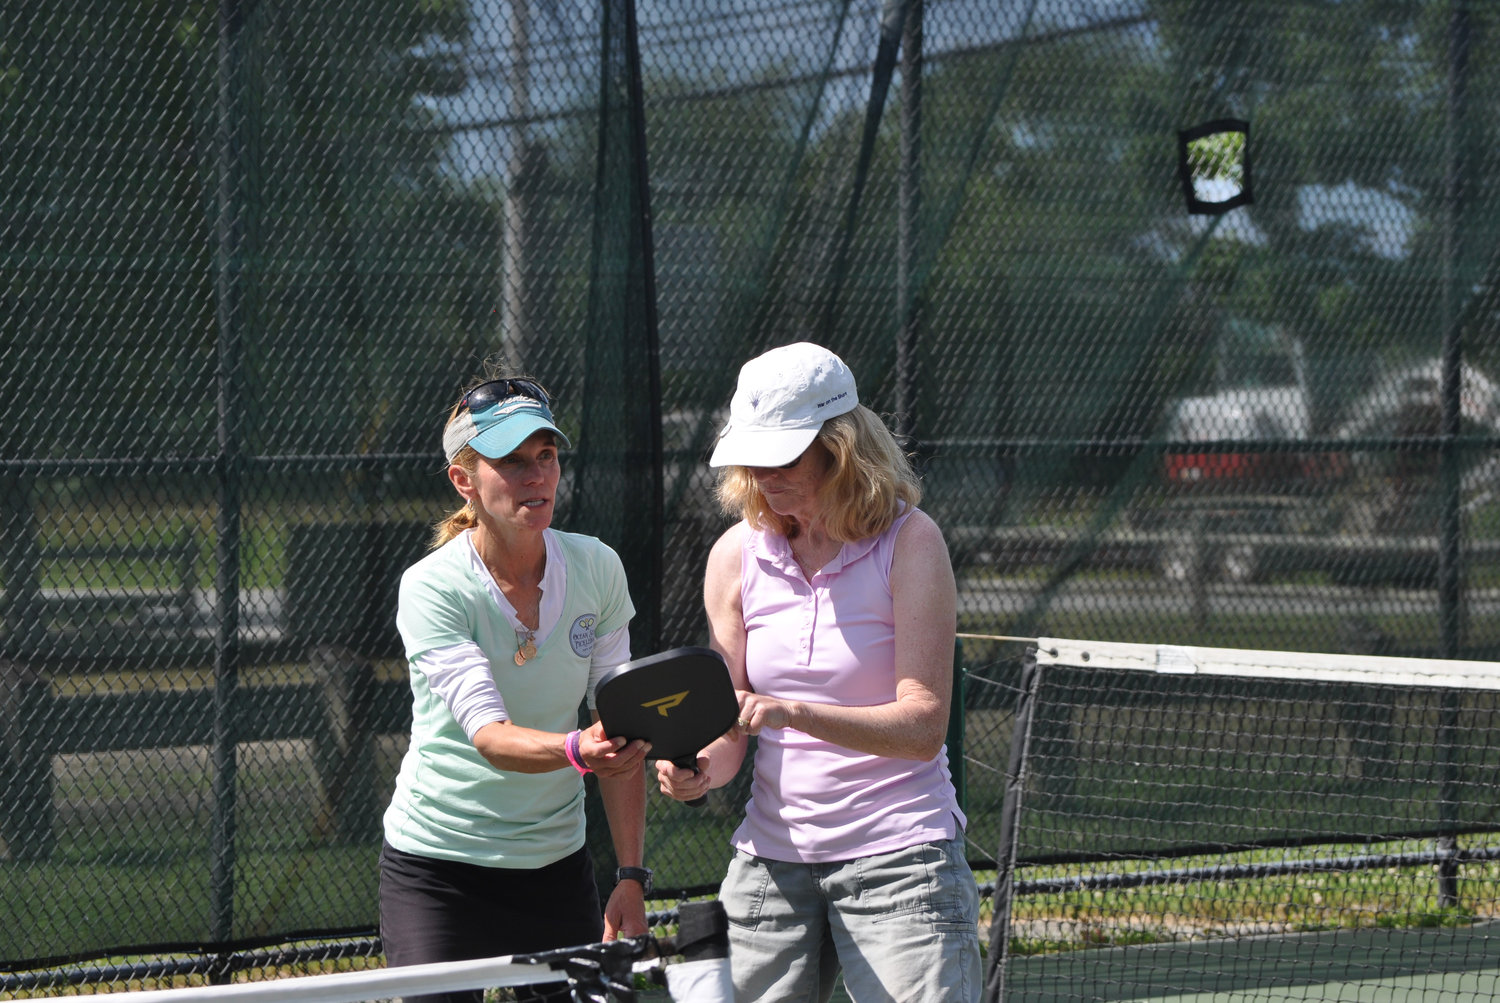 Ocean State Pickleball founder Kara Biller instructs a player on using pickleball’s broad, flat paddle